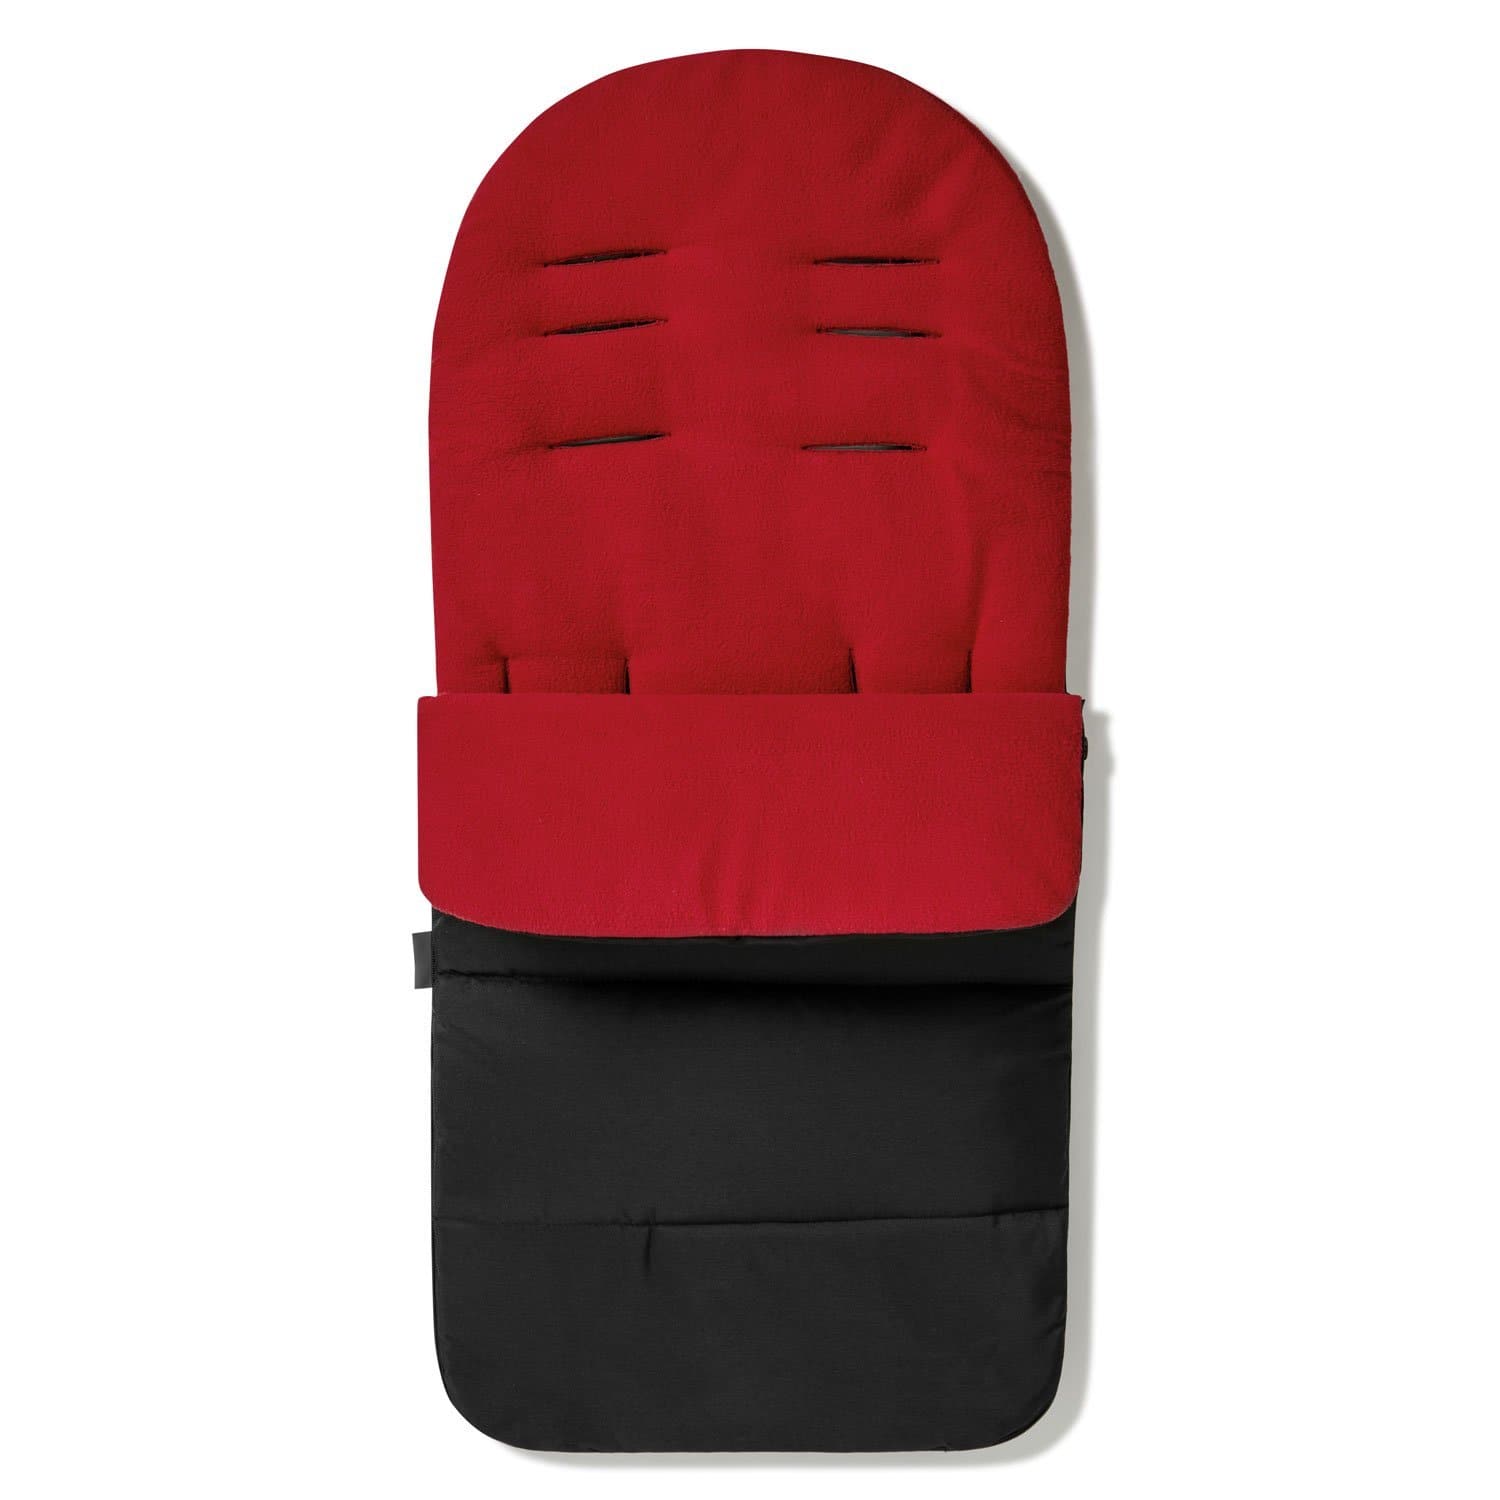 Premium Footmuff / Cosy Toes Compatible with Orbit Baby - Fire Red / Fits All Models | For Your Little One